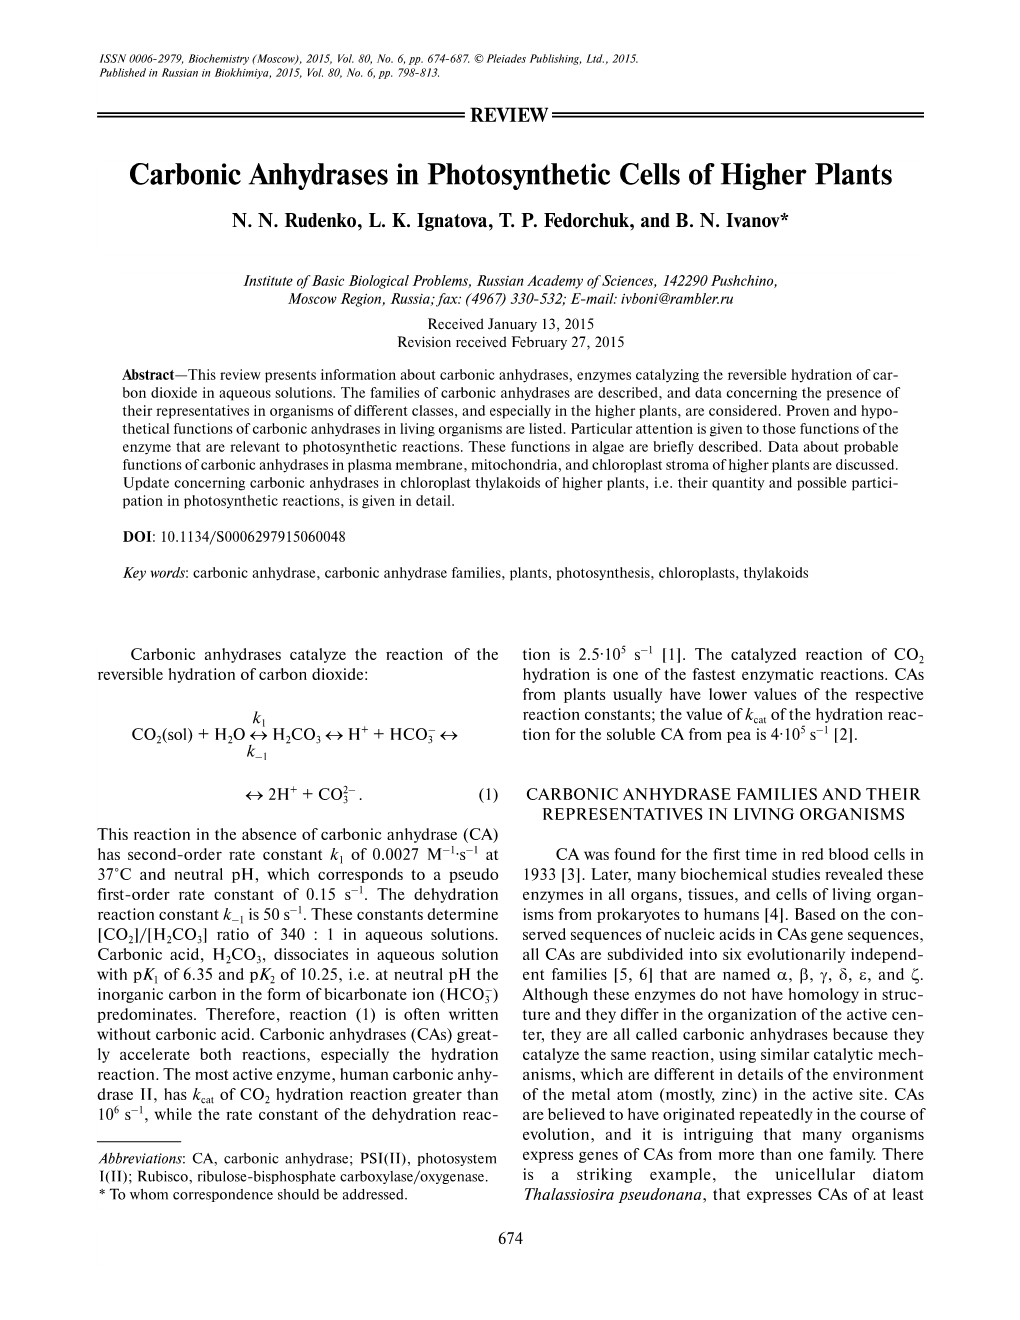 Carbonic Anhydrases in Photosynthetic Cells of Higher Plants